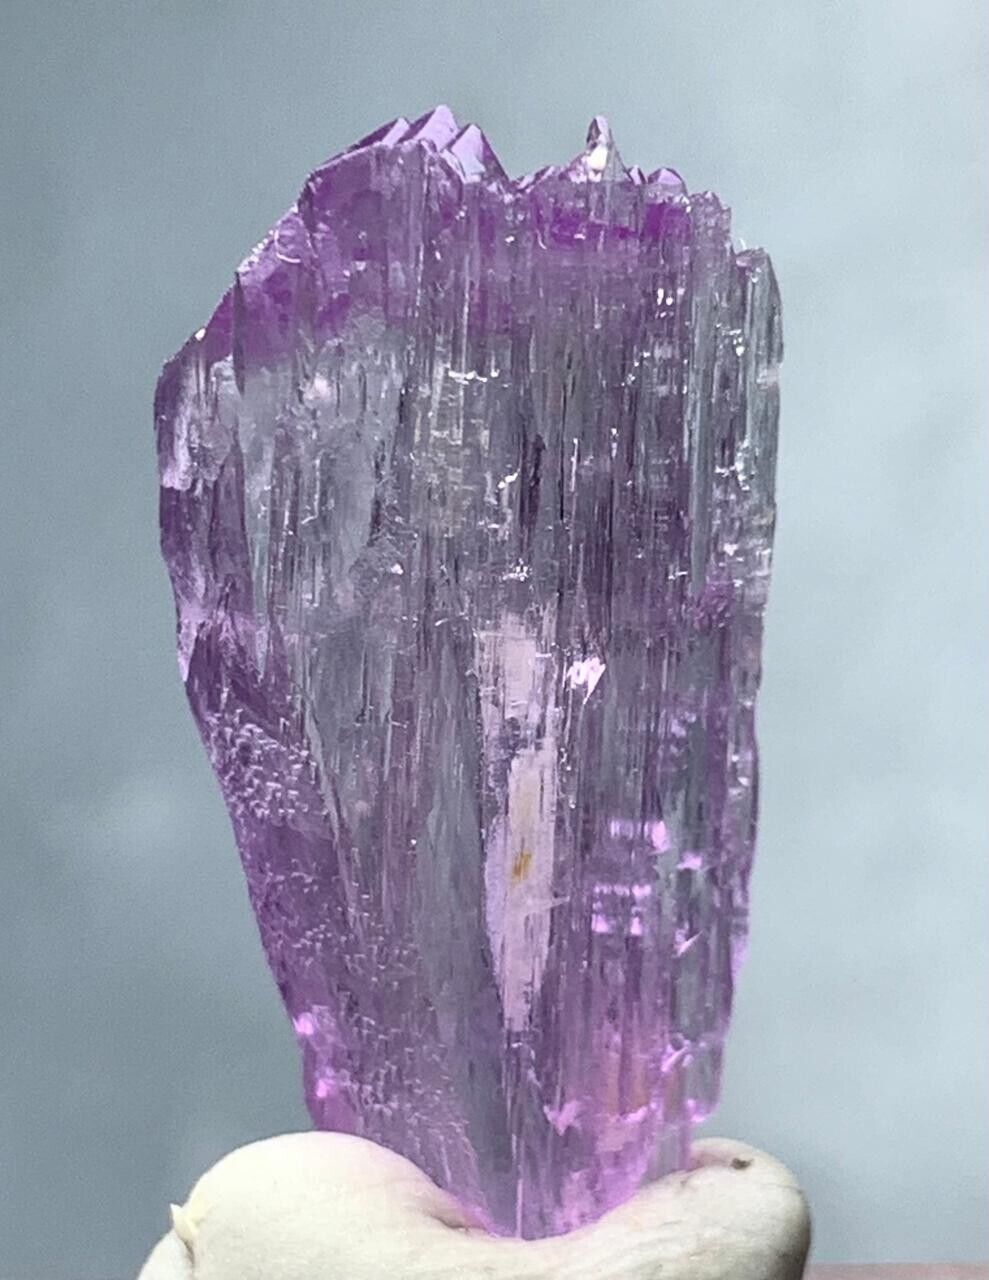 24 Cts Beautiful Top Quality Kunzite Crystal From Afghanistan